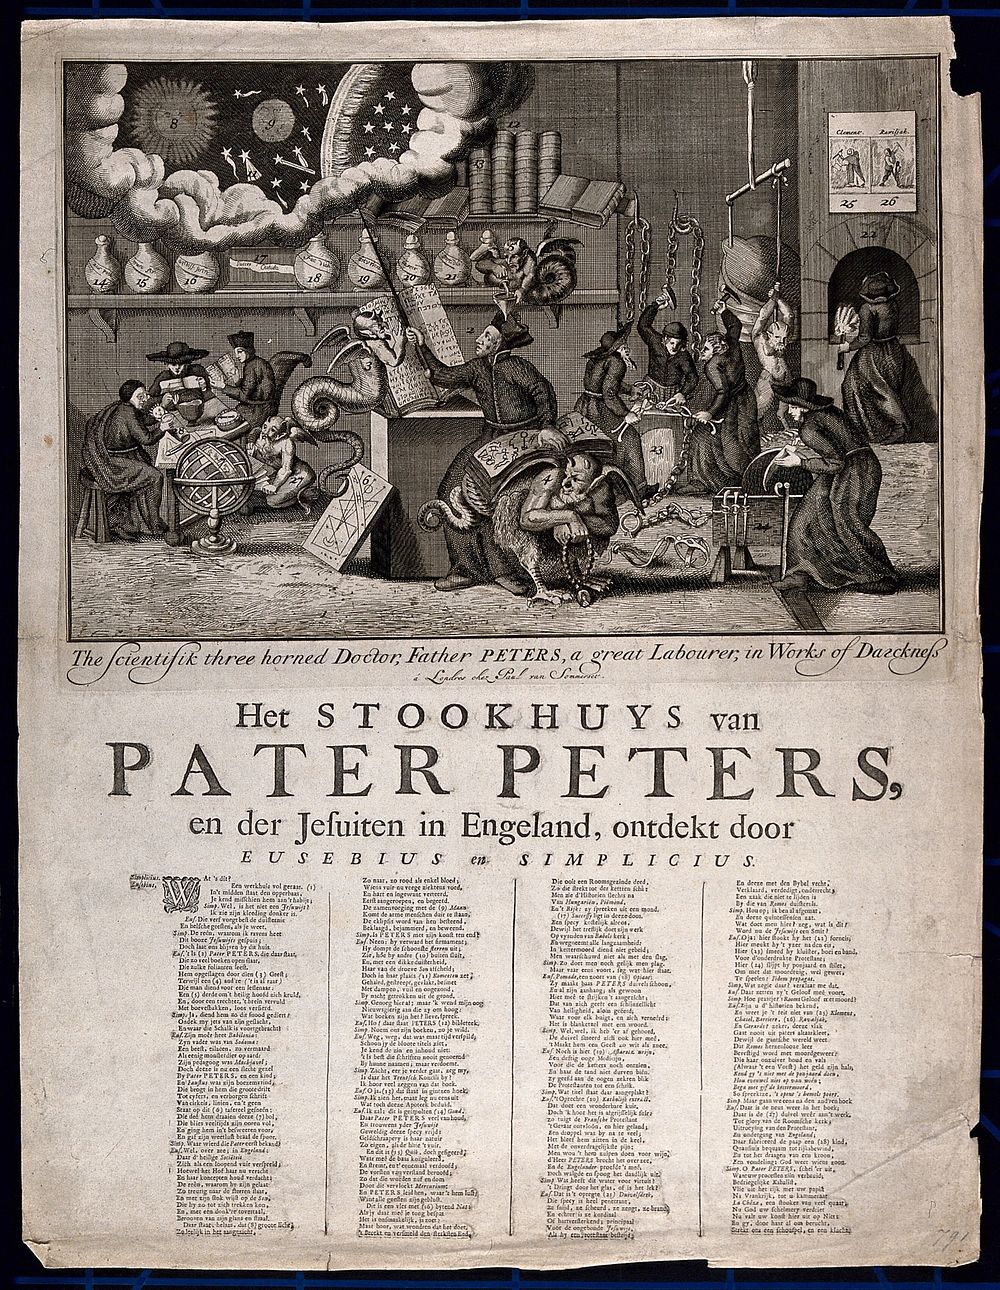 The evil sciences of the Jesuit doctor Father Peters in London. Etching.